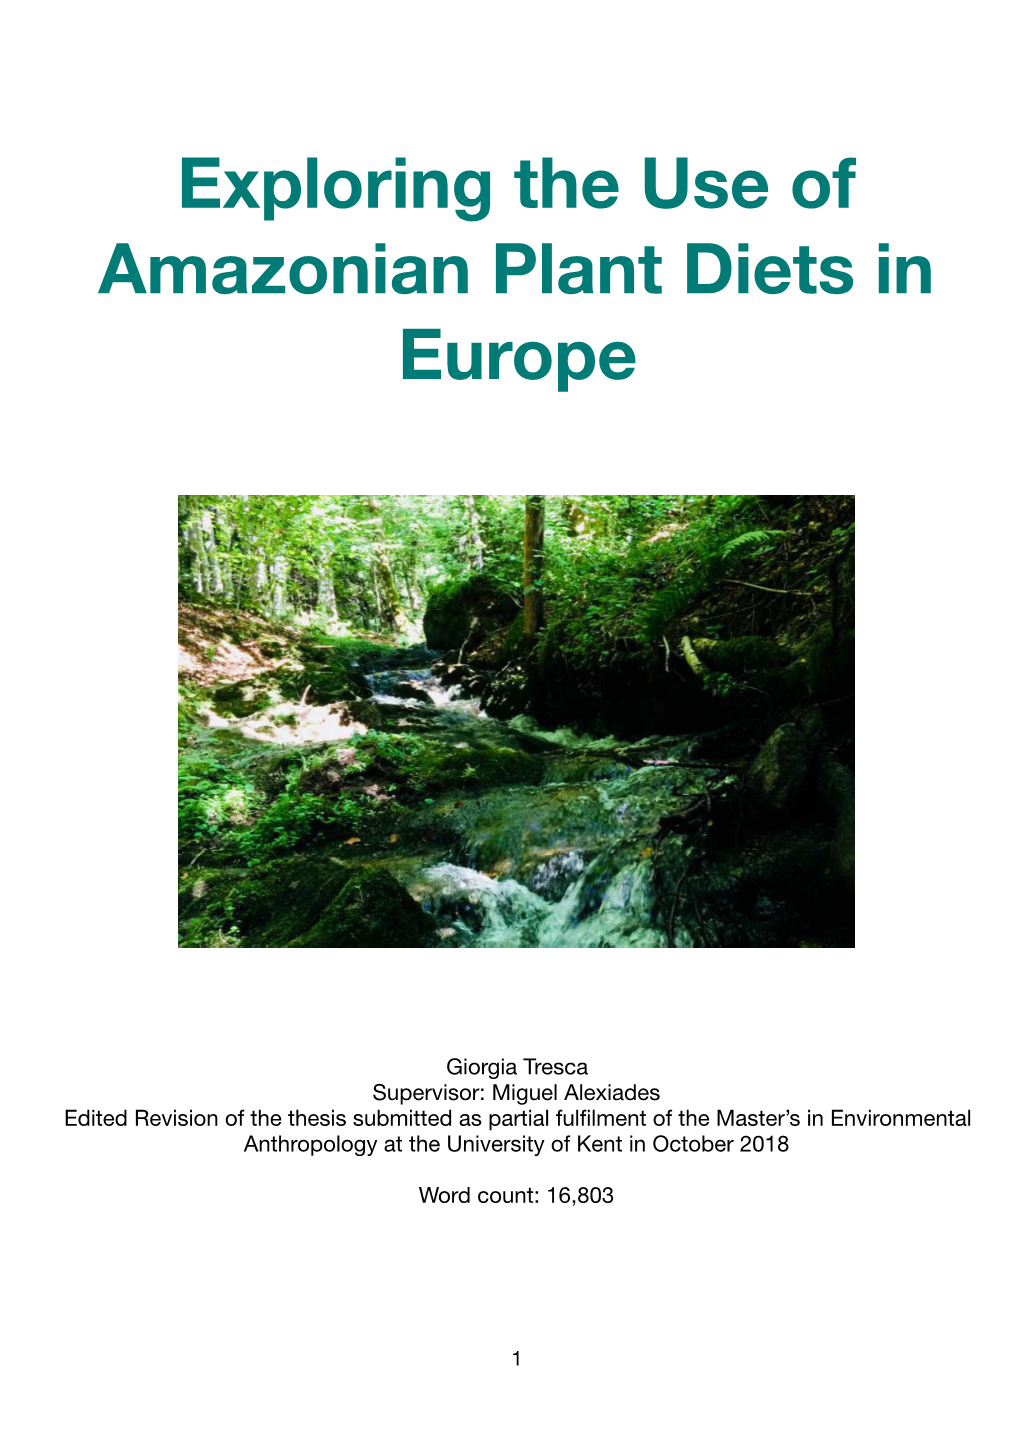 Exploring the Use of Amazonian Plant Diets in Europe